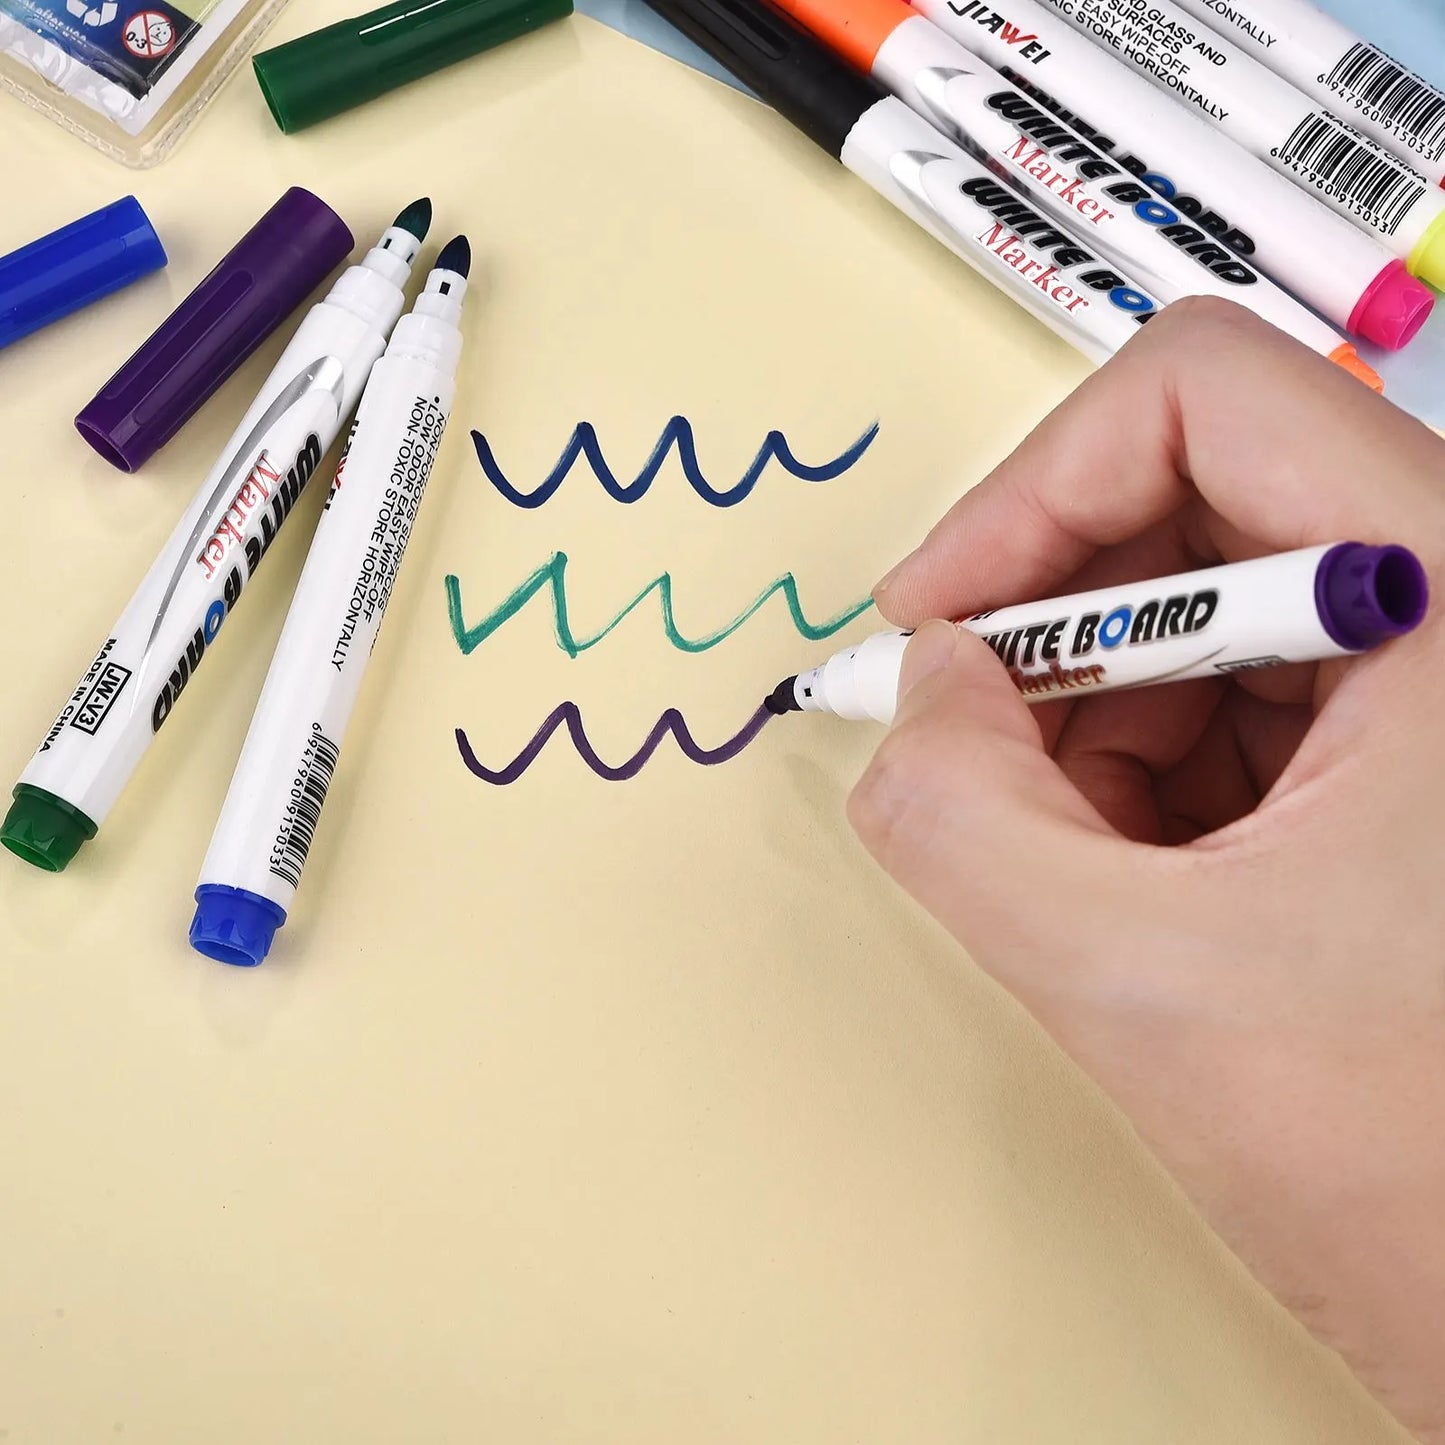 Kids' Creative Splash 8/12-Color Water Magic Pen Set: Float & Doodle Art Markers for Early Artistic Discovery